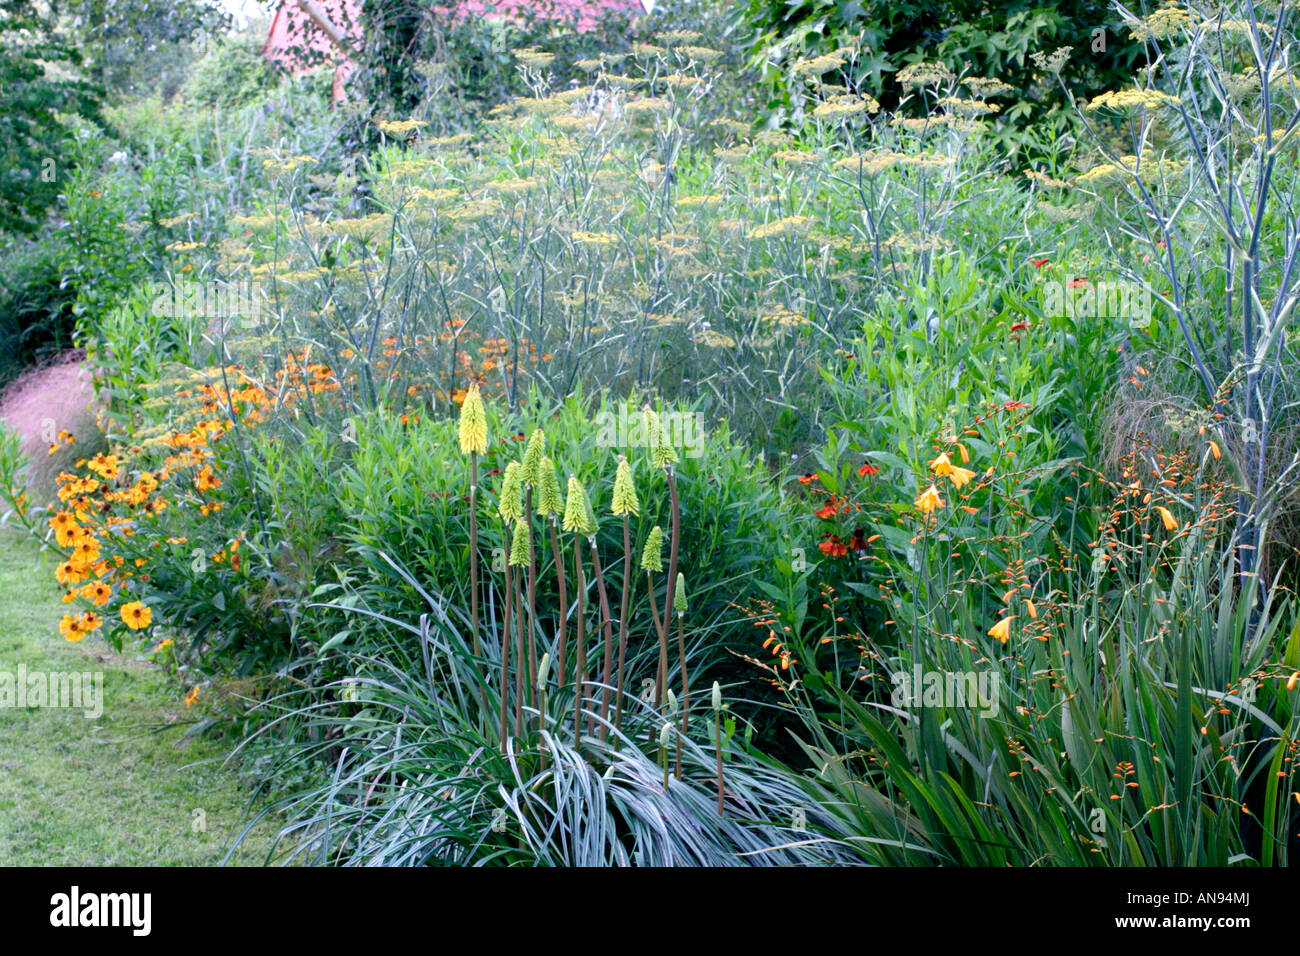 The hot border at Holbrook Garden, Devon during August with Kniphofia, Bronze fennel and Heleniums Stock Photo